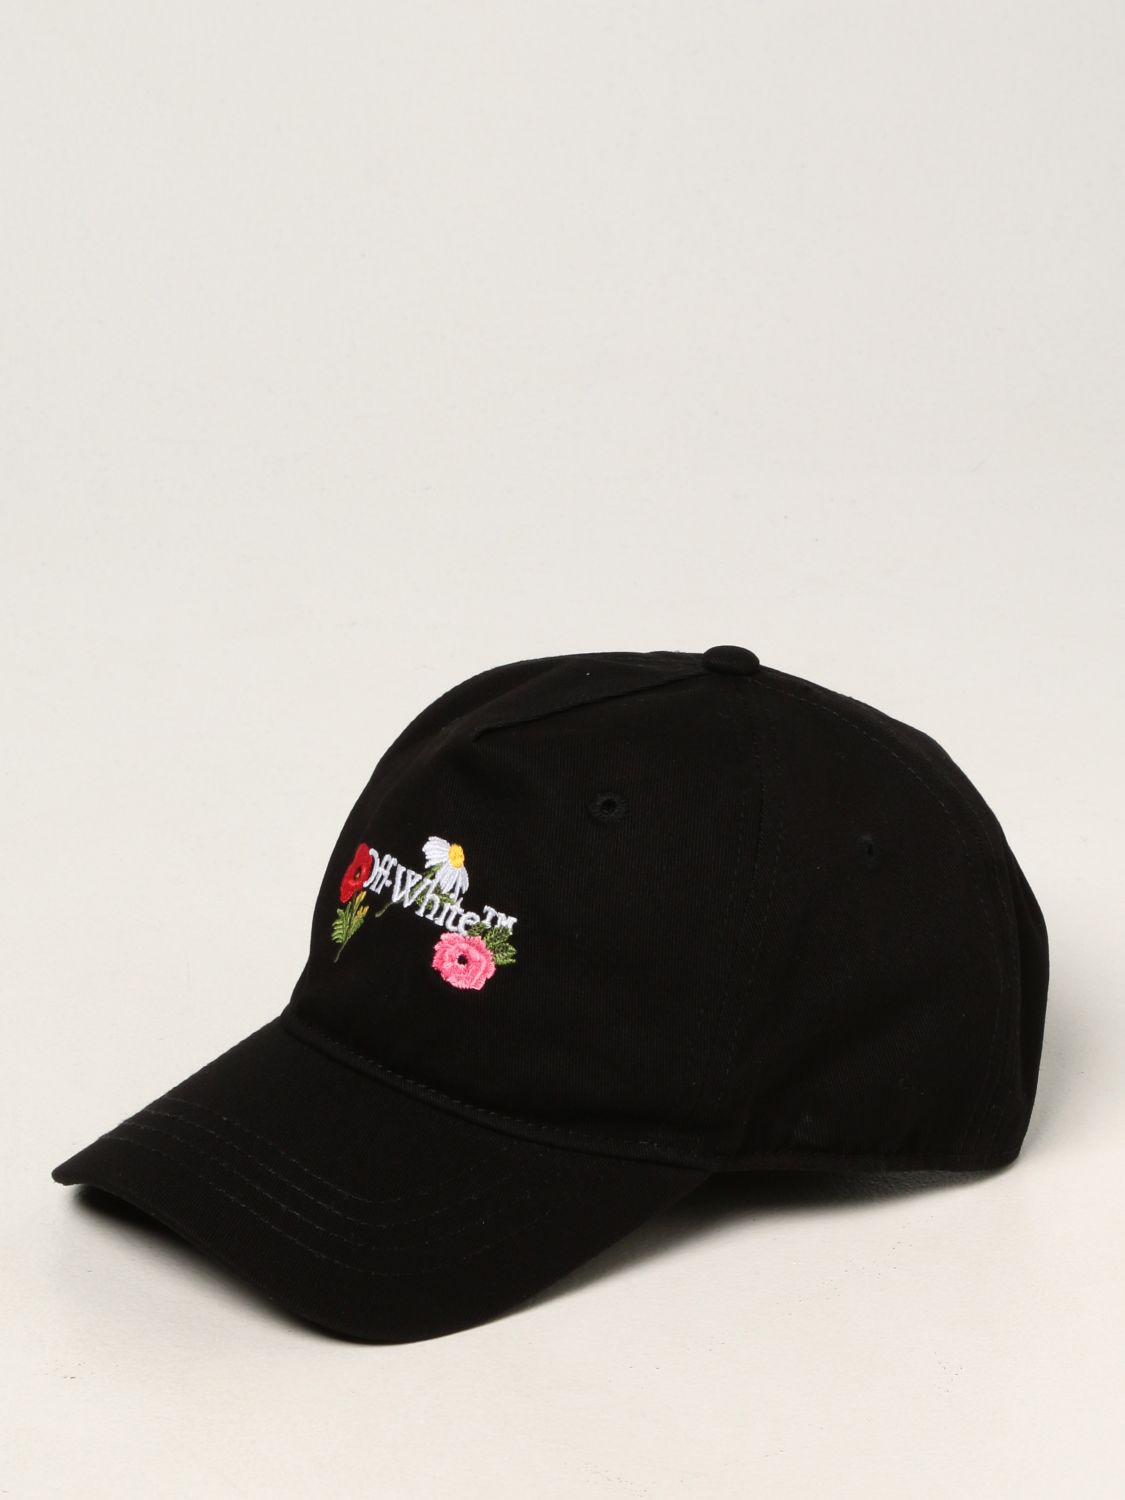 Girls' hats Off-White: Off White baseball cap with embroidered flower logo black 1